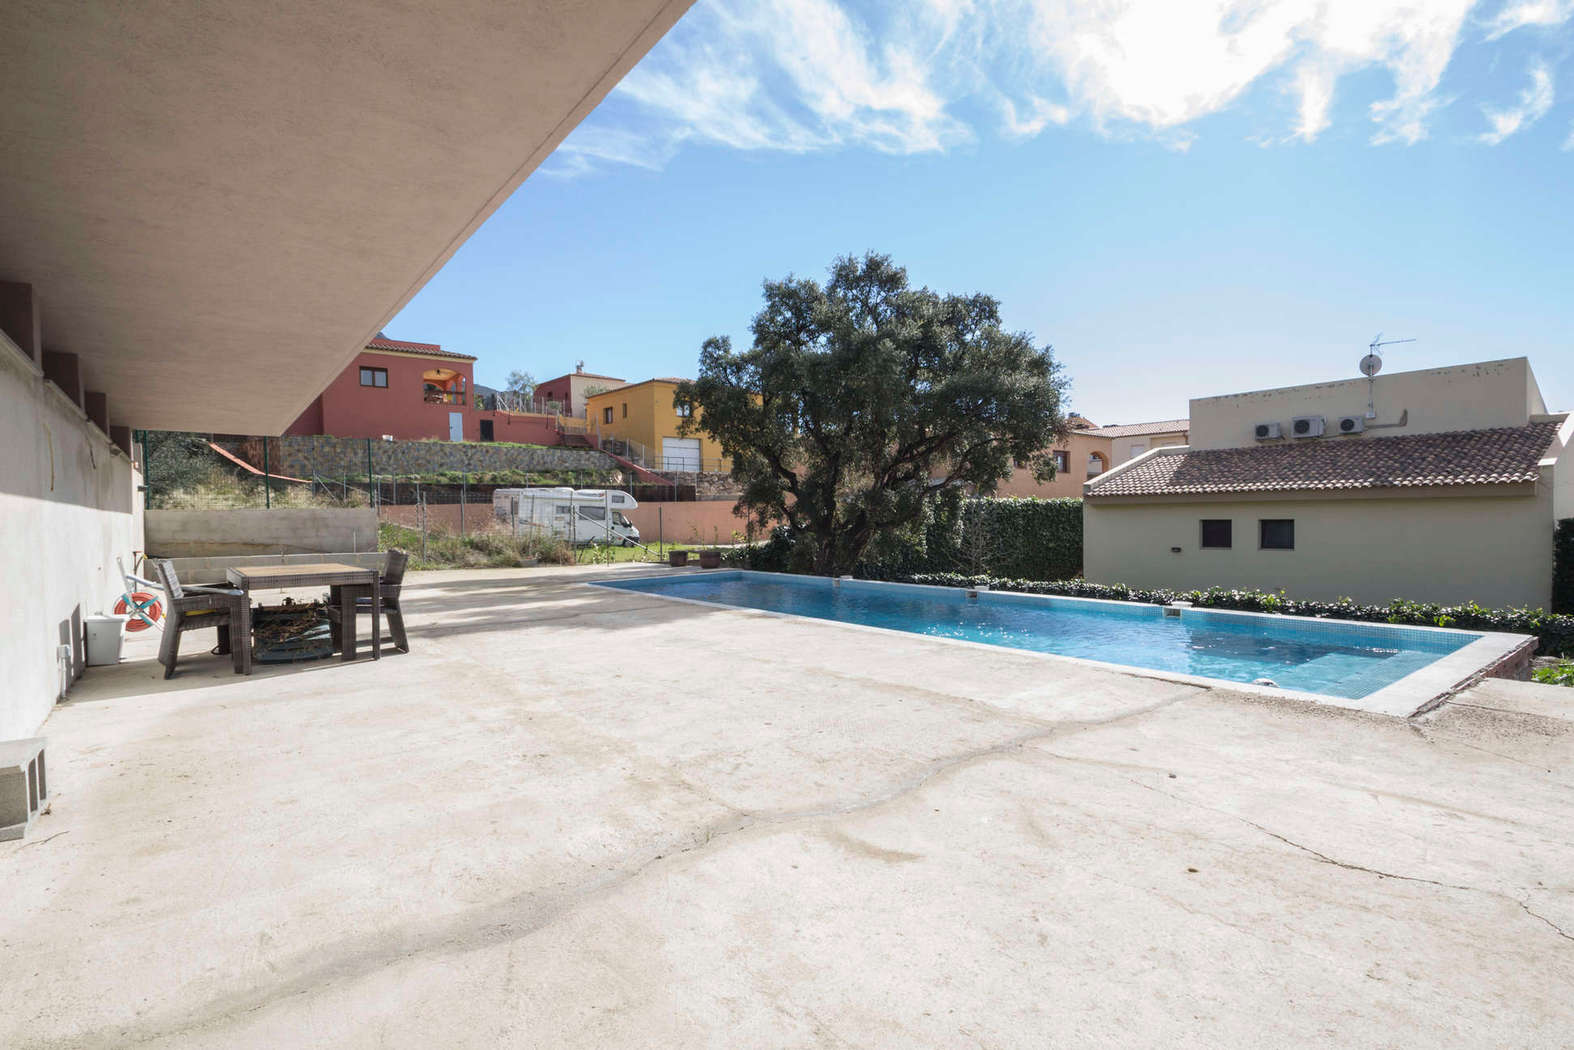 Modern villa with pool for sale in Palau Saverdera